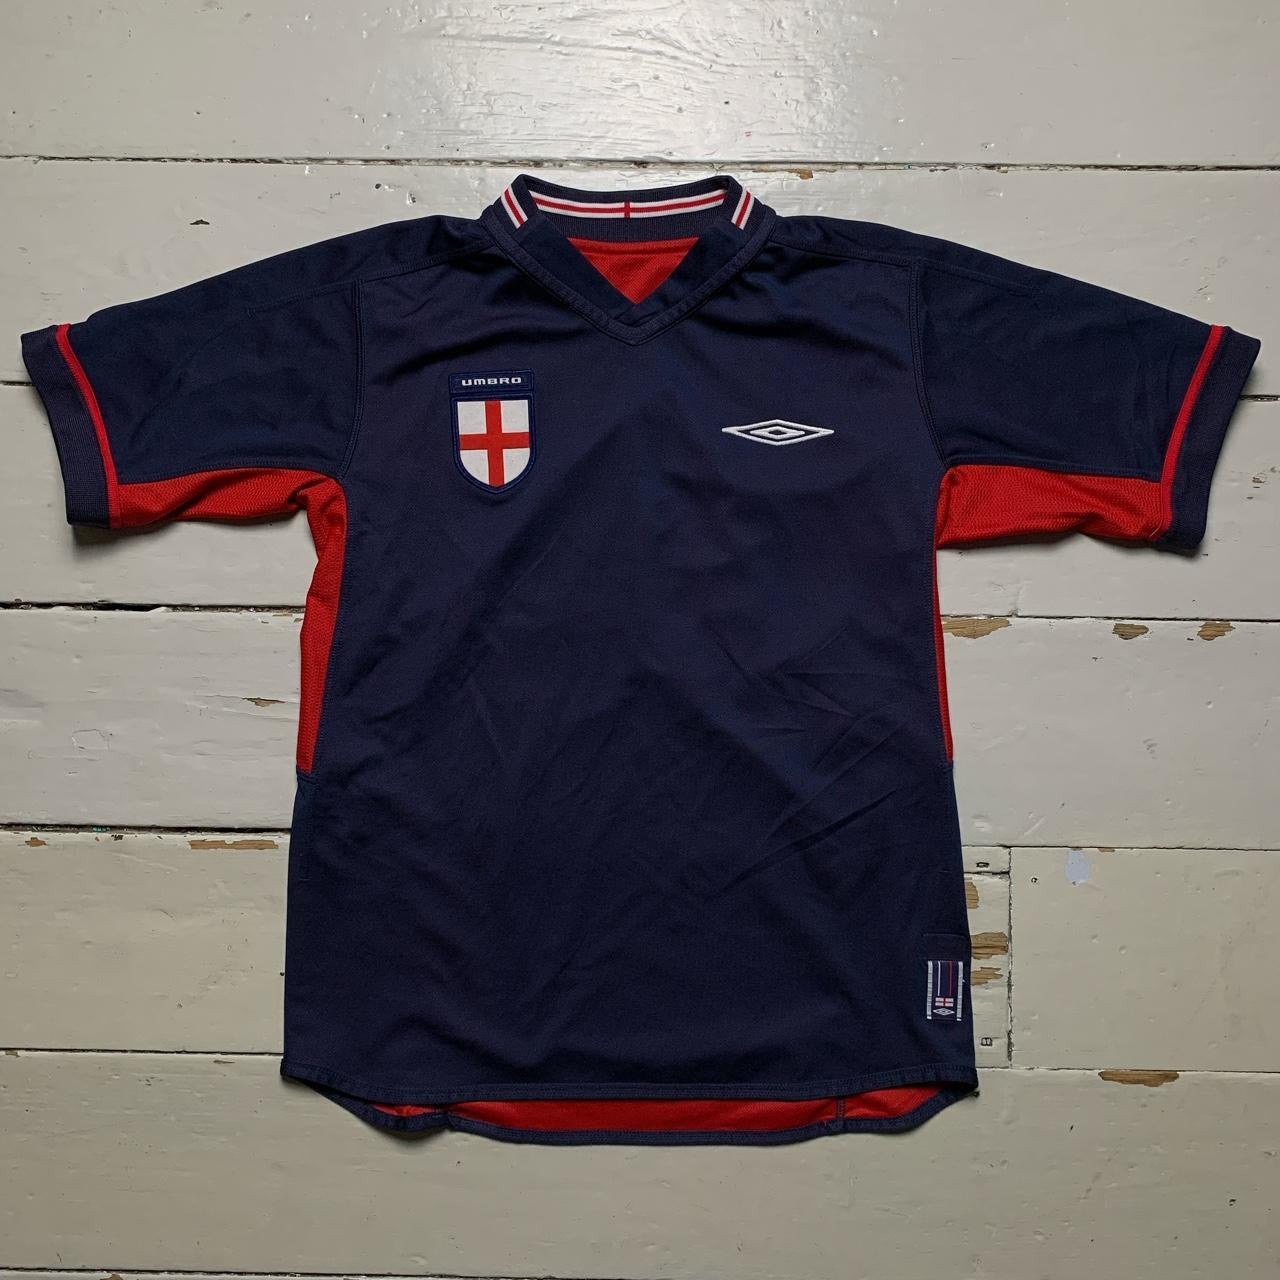 England 2004 Reversible Jersey (Small)